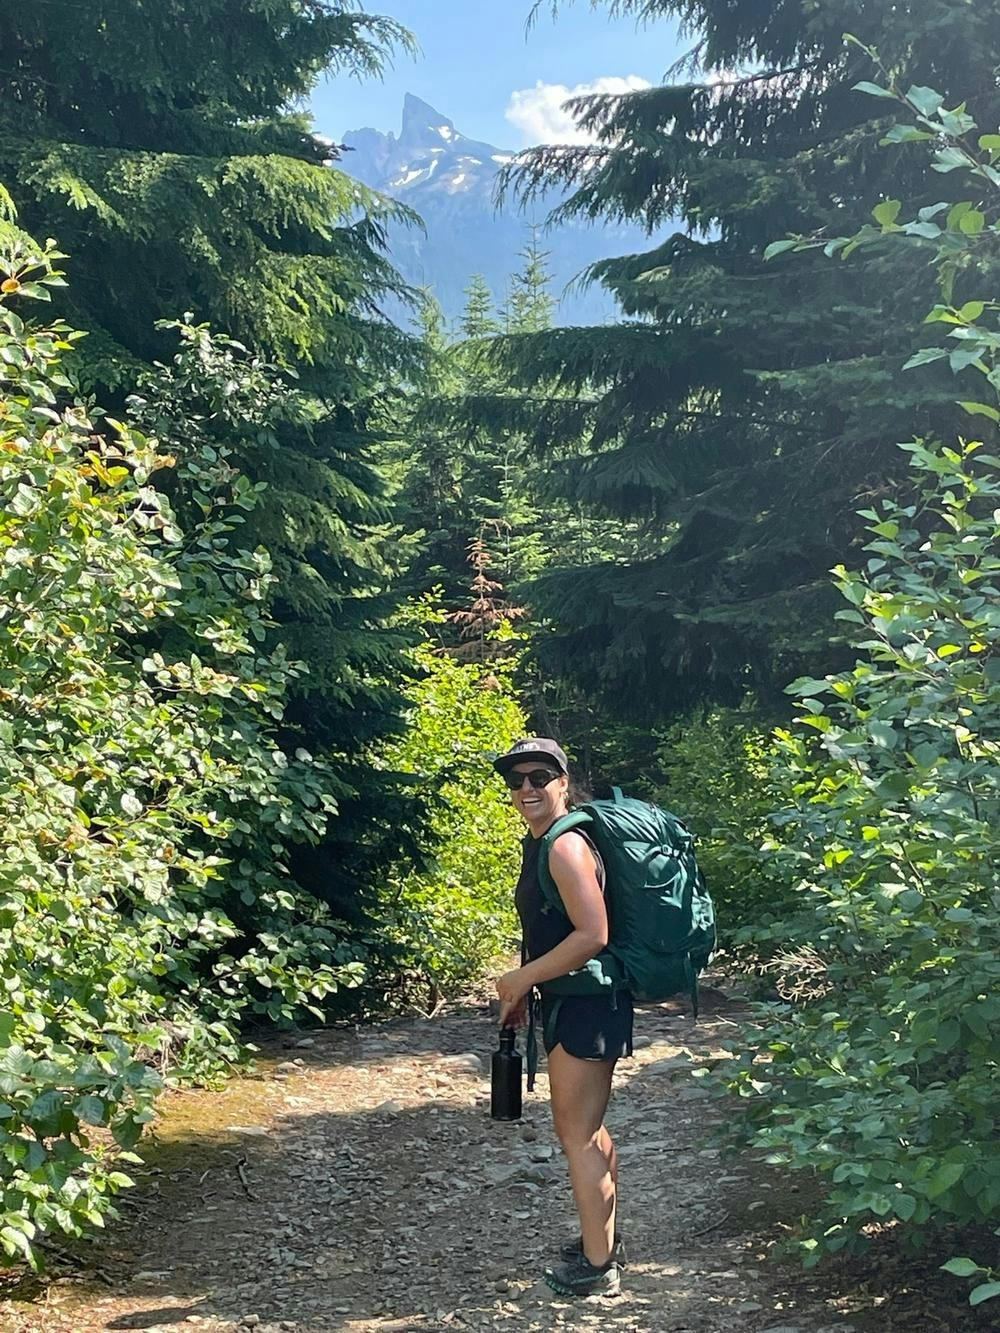 Pietra smiling and wearing a large green backpack on a hiking trail with green trees in the background